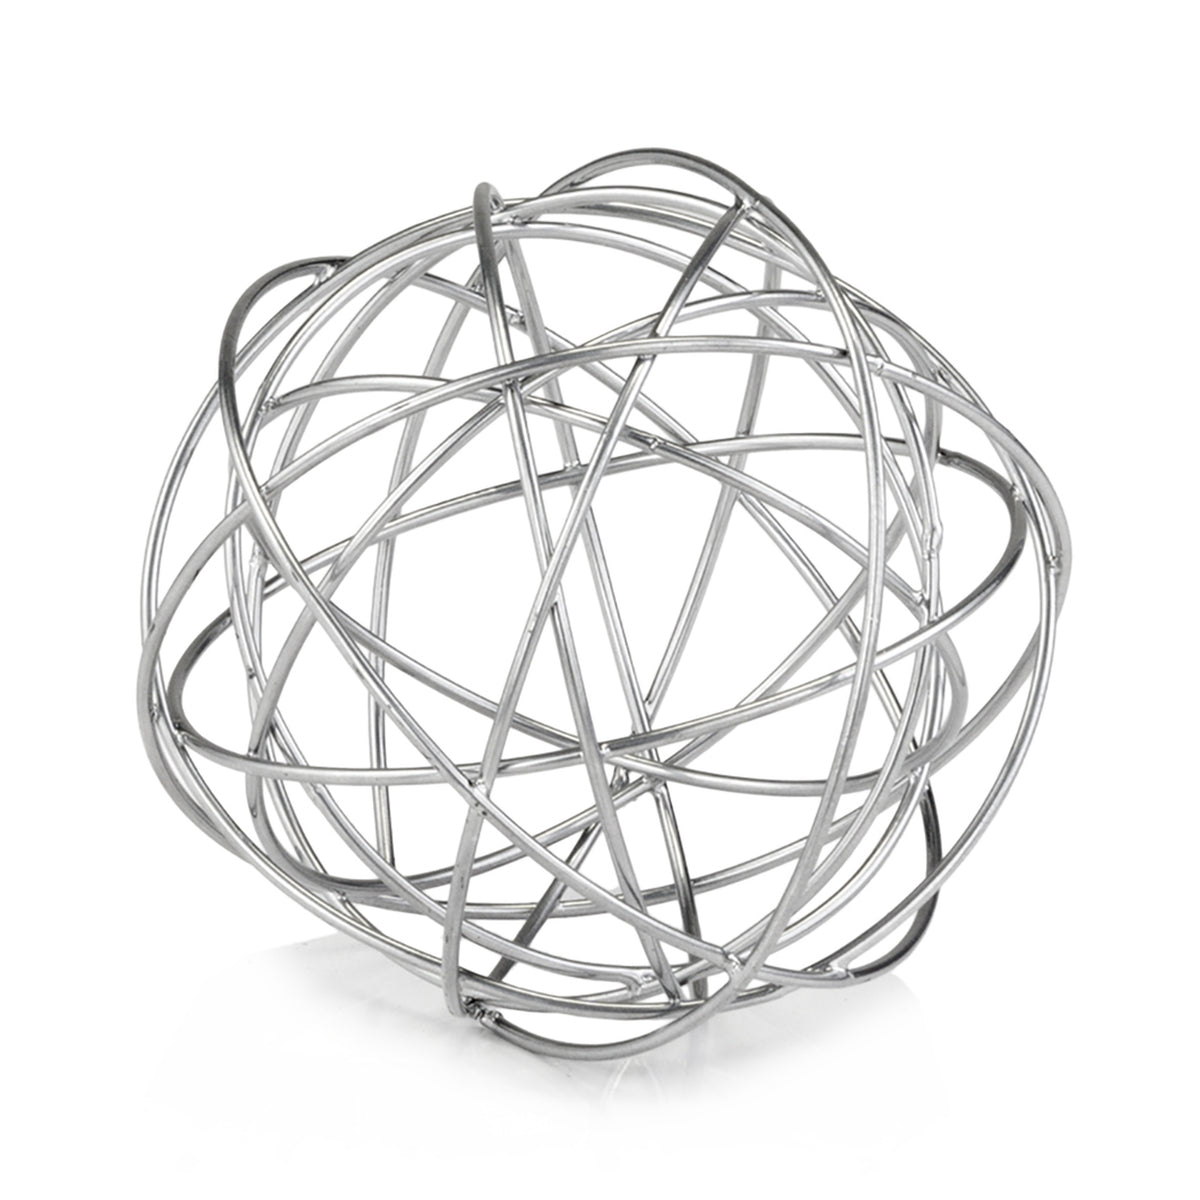 Decorative Open Wire Silver Metal Spheres